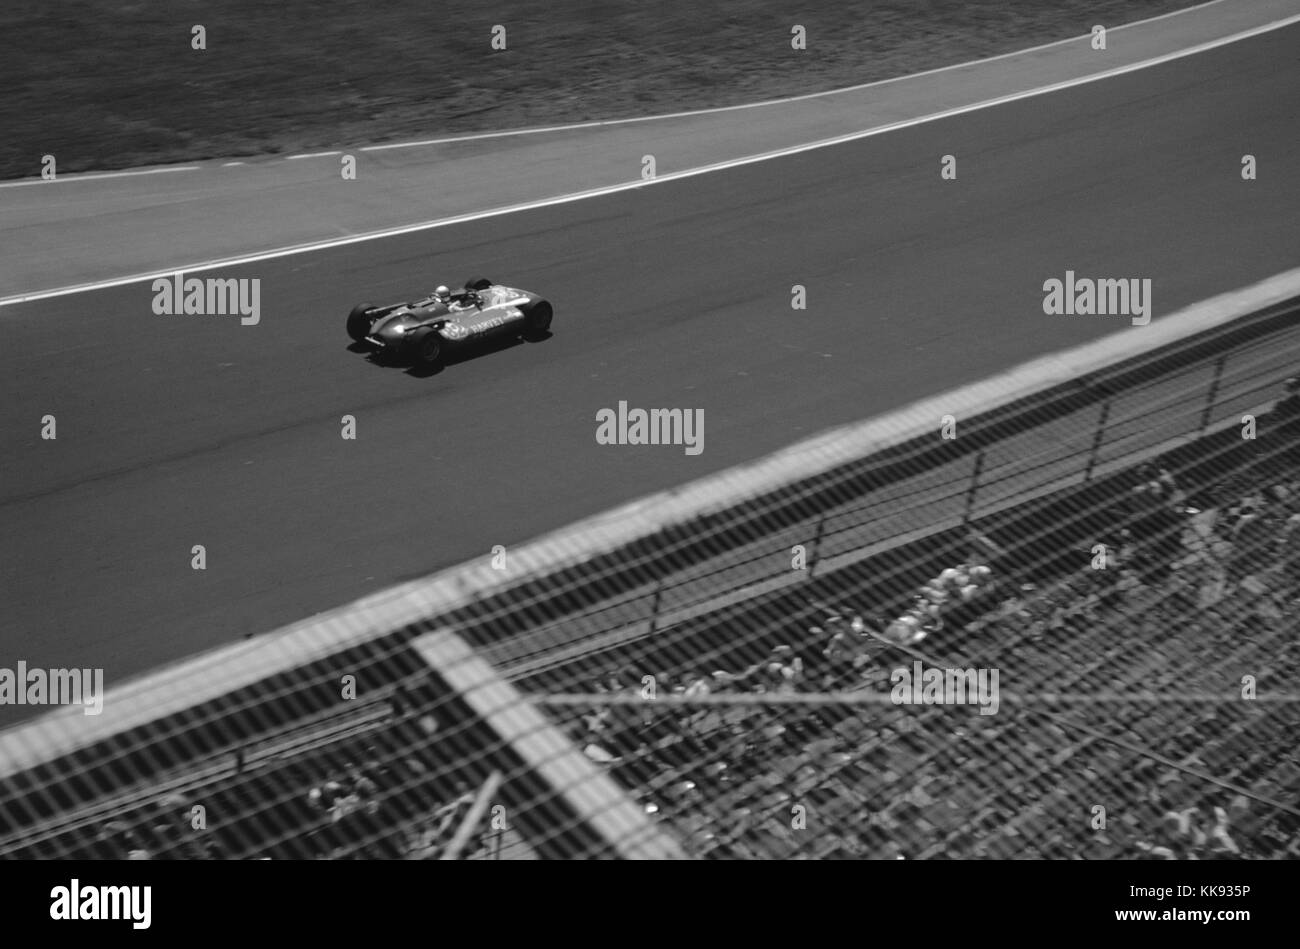 Race car driver Masten Gregory driving car 82, made by MT Harvey, during a qualifying lap for the Indianapolis 500 race at Indianapolis Motor Speedway, Indianapolis, Indiana, May 30, 1963. Stock Photo